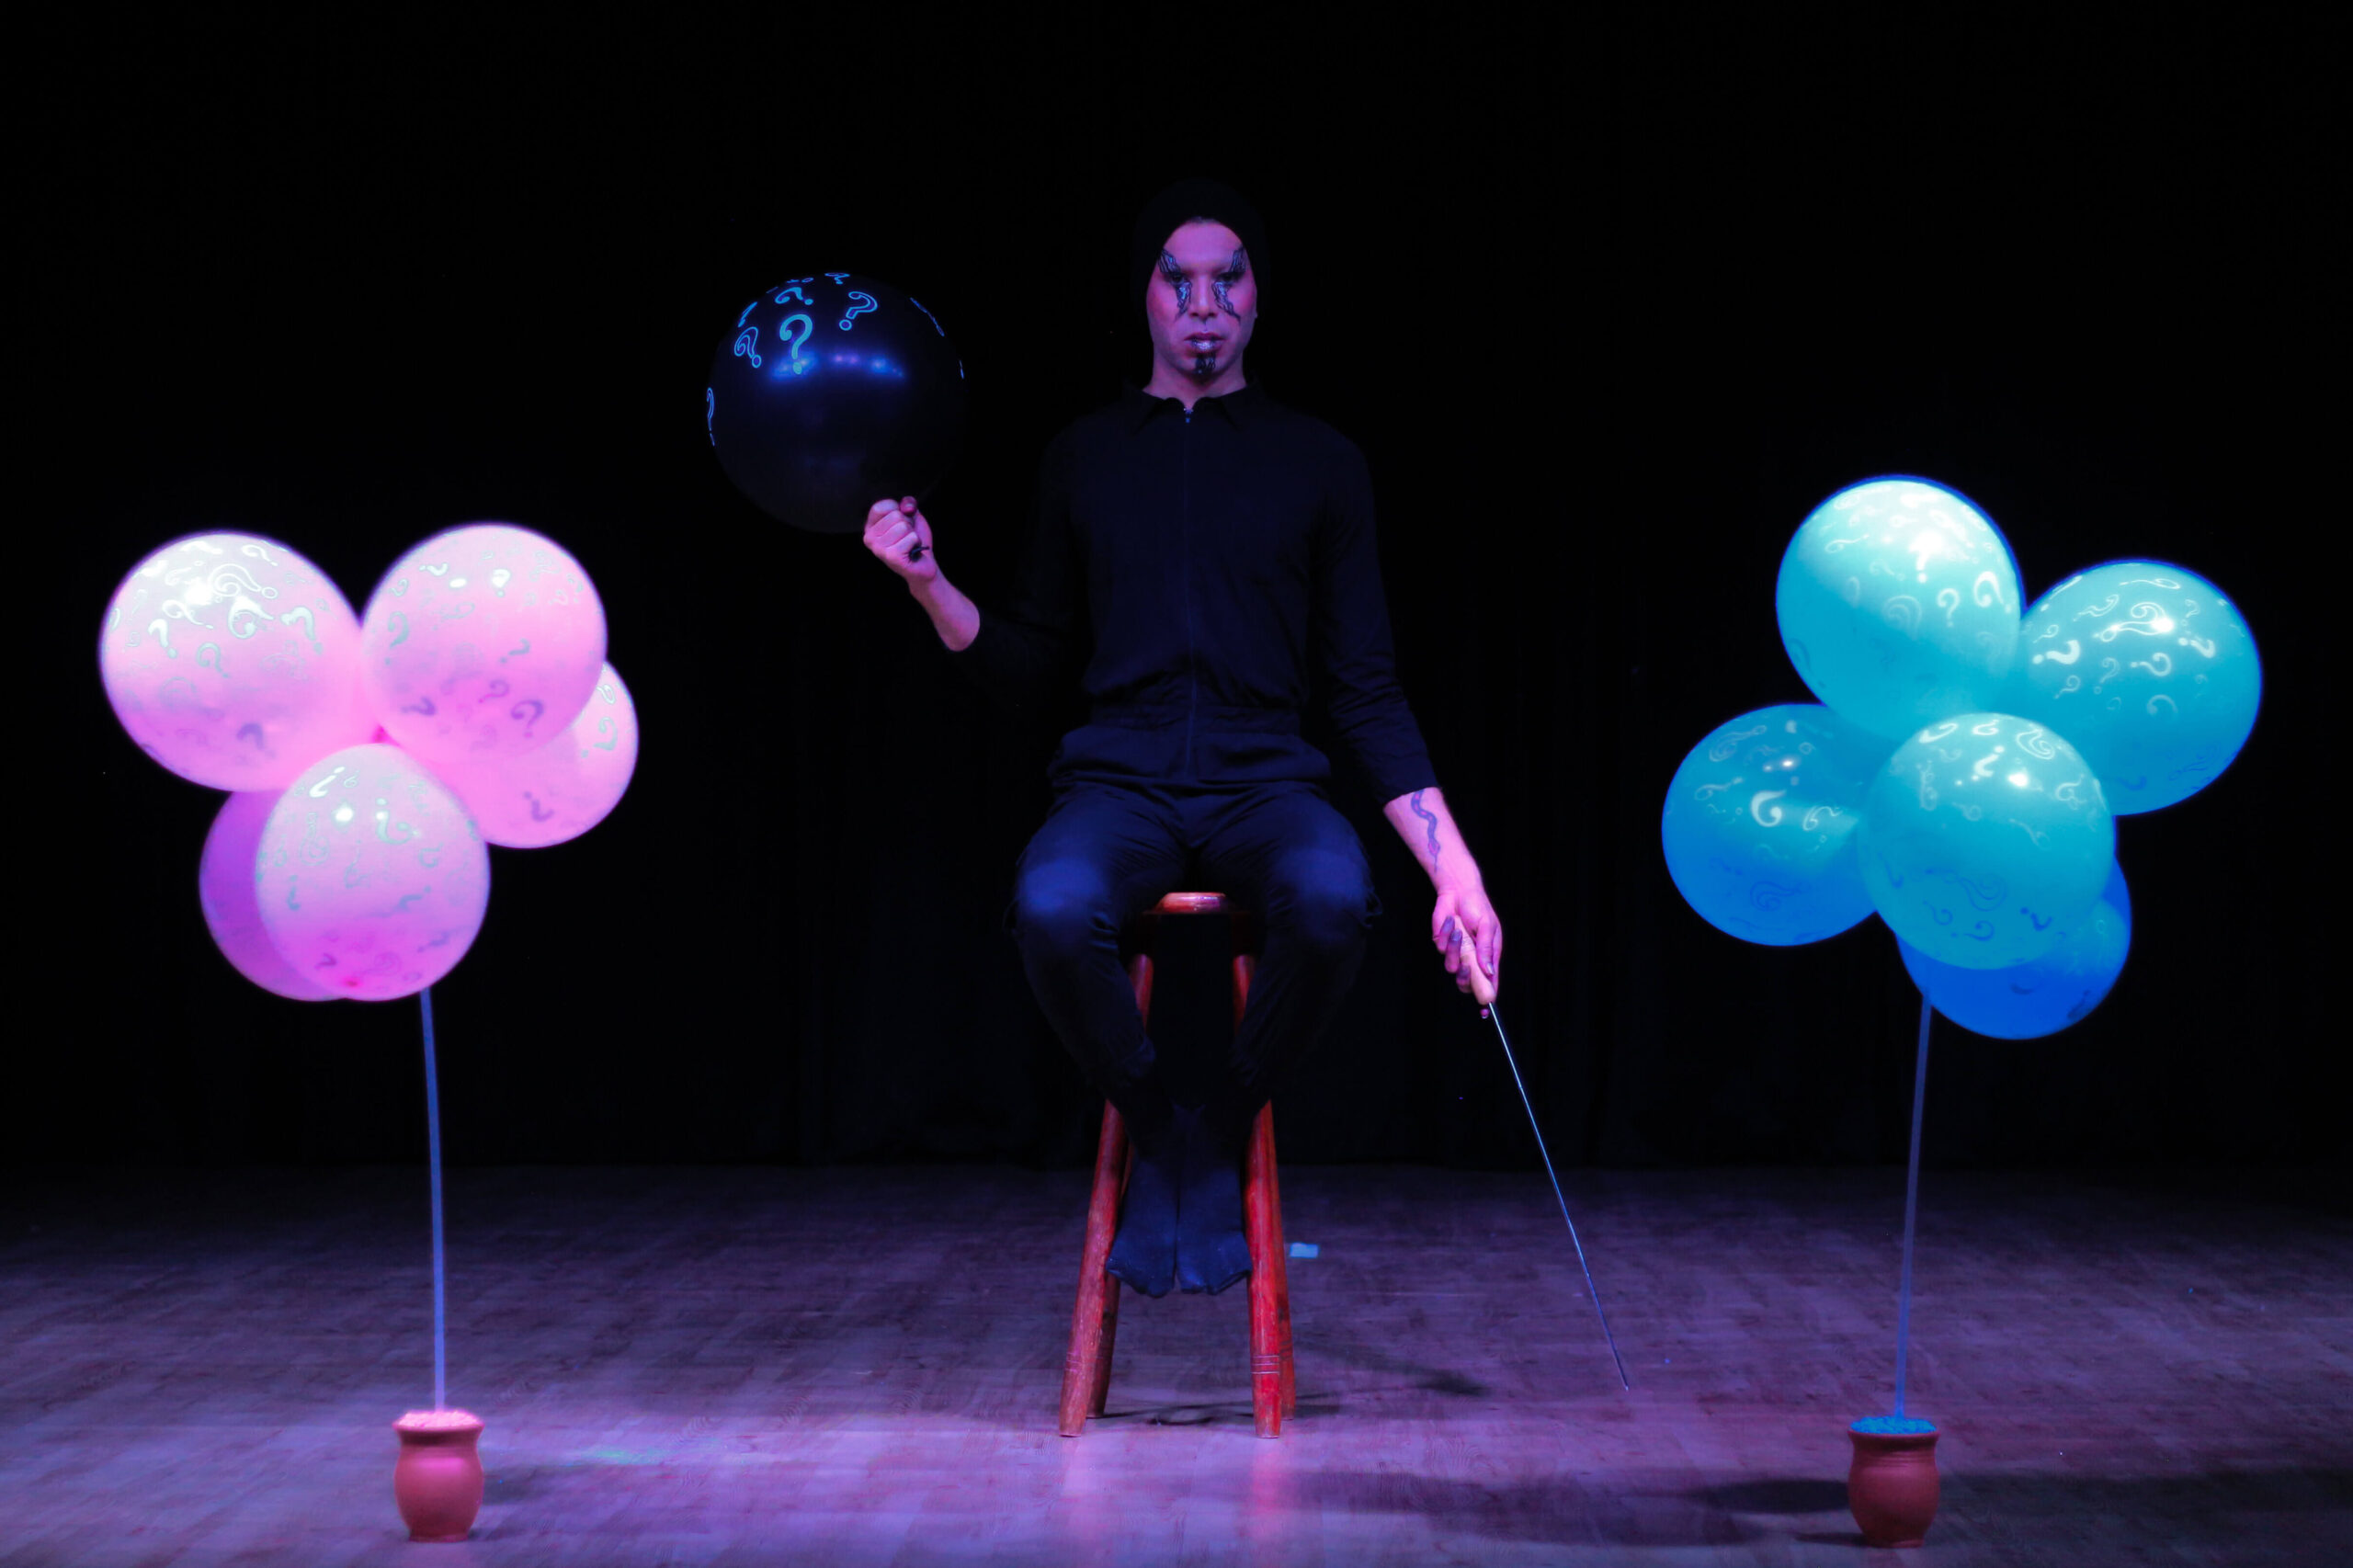 Jono Lena sits with a balloon on one hand and a long, pointy stick in the other. Pink balloons are placed on one side of her and blue balloons on the other.